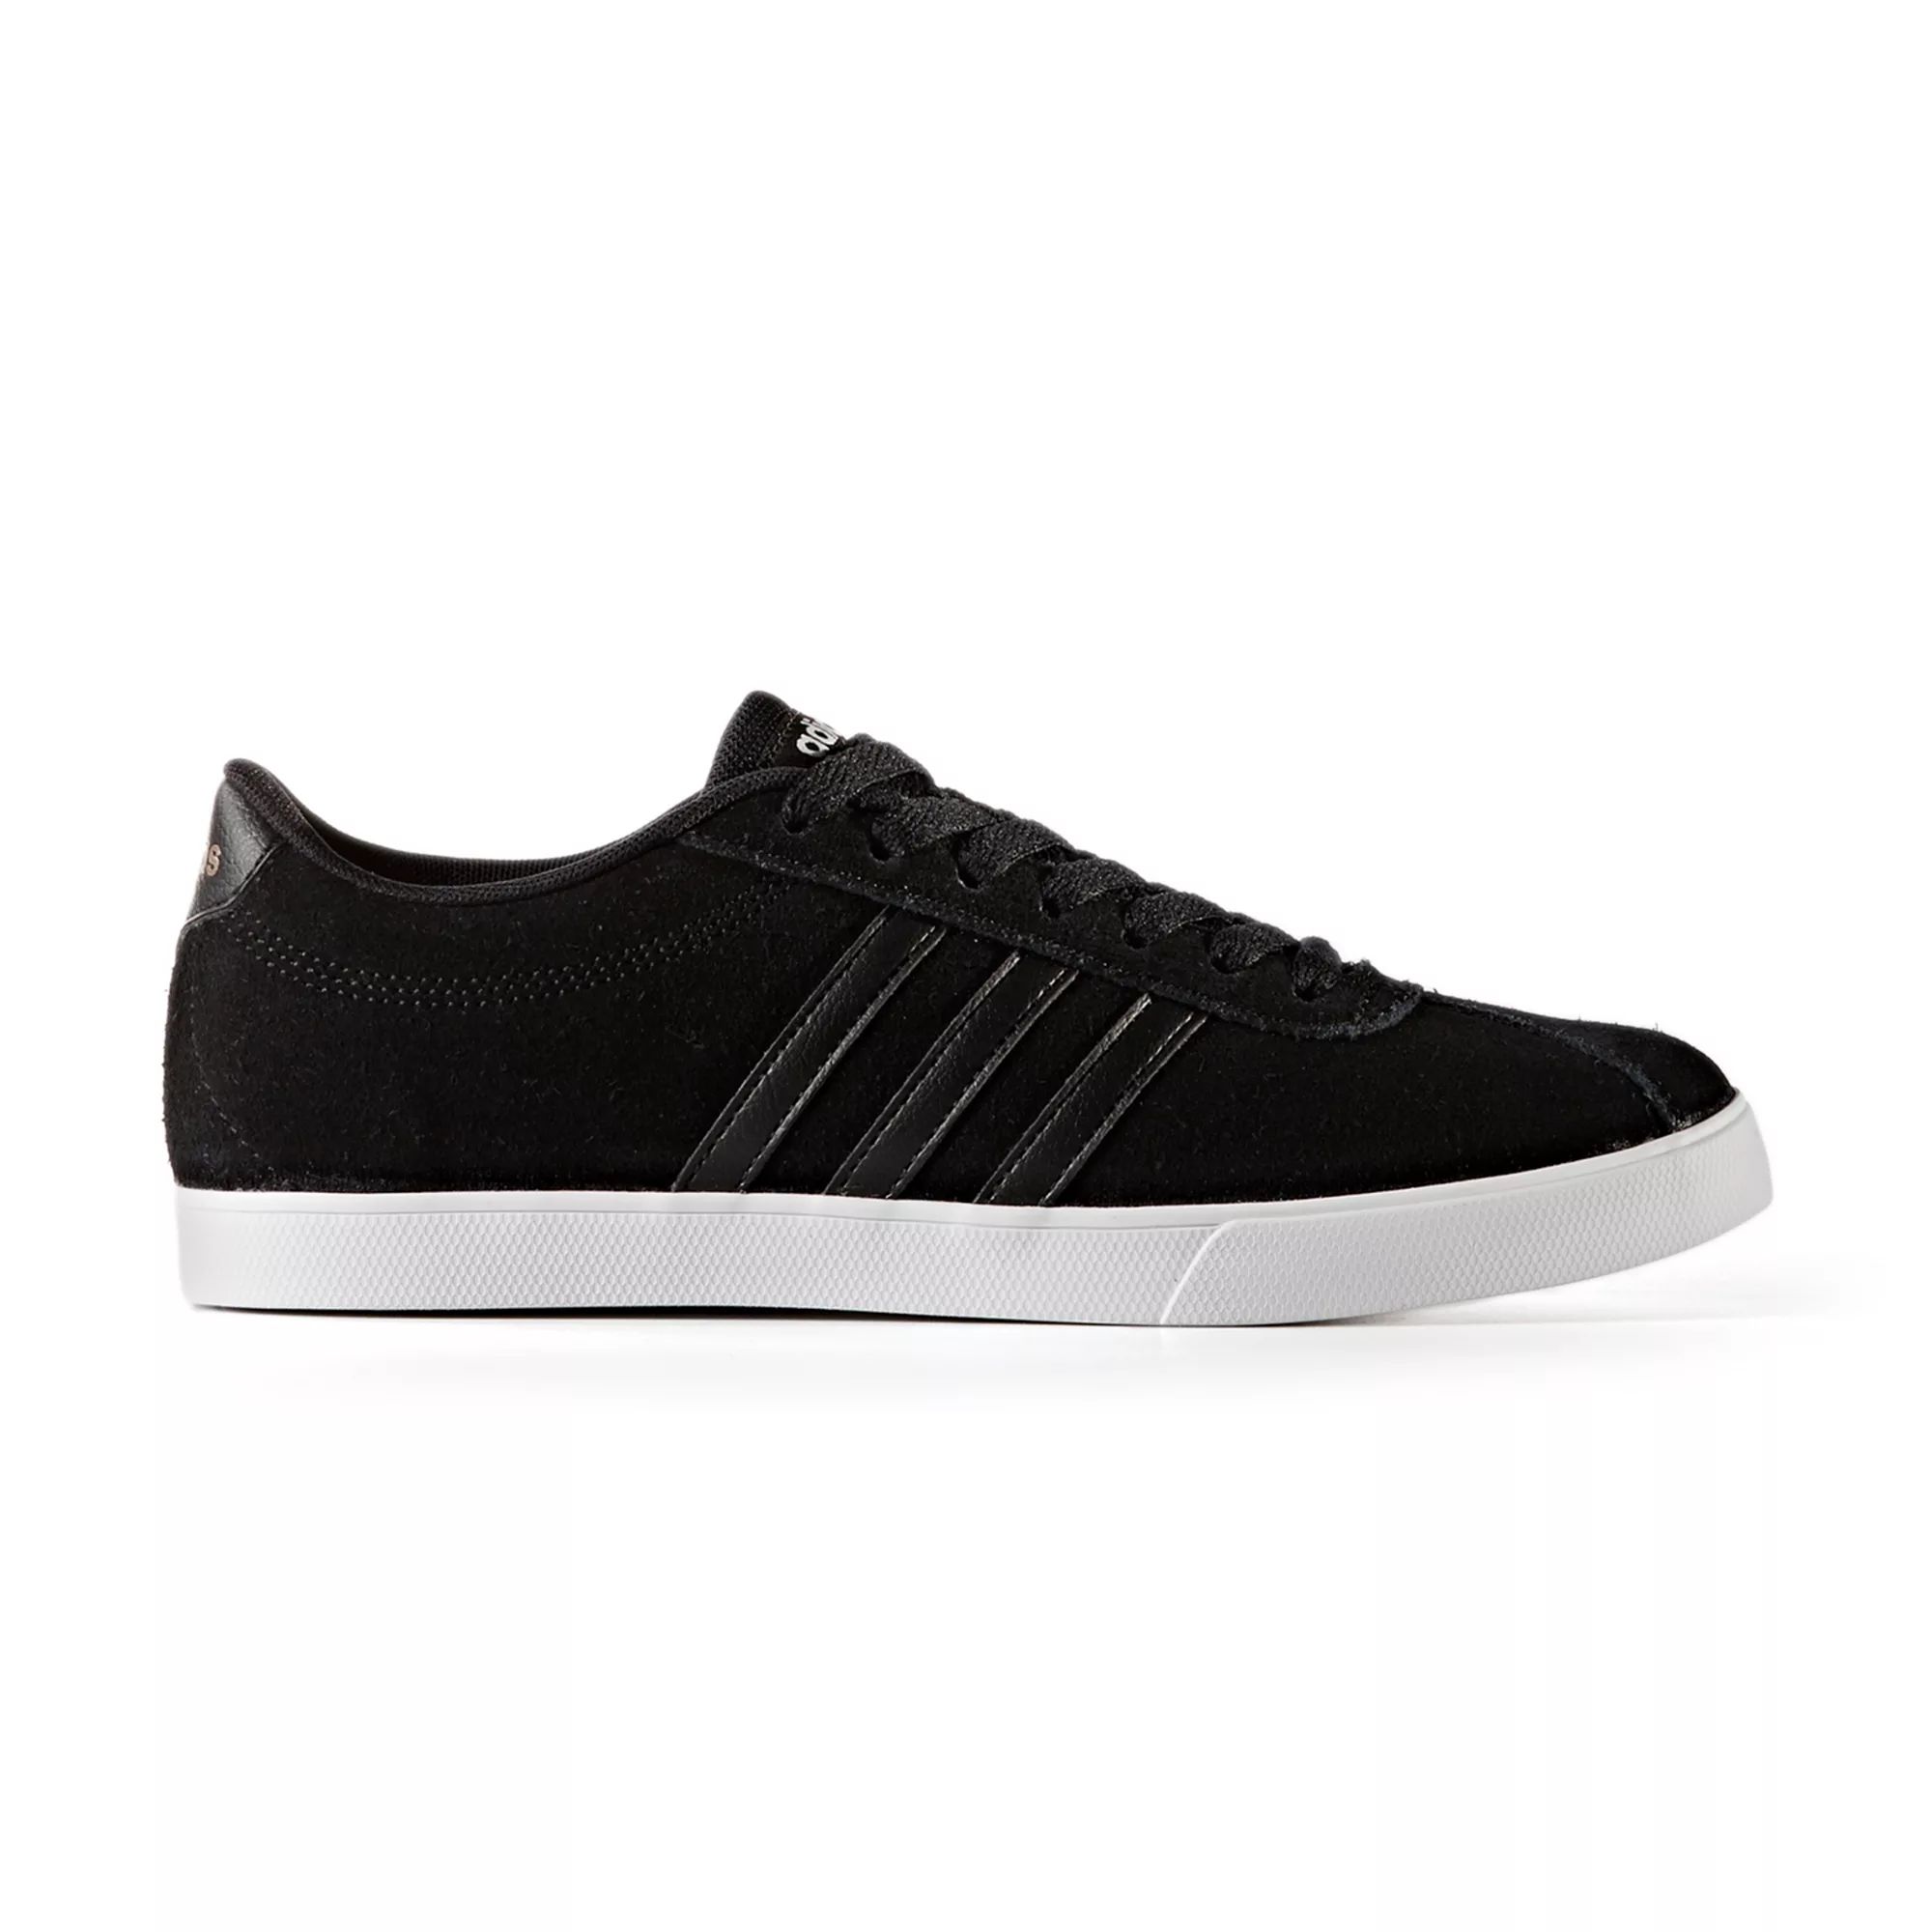 adidas NEO Courtset Women's Suede Sneakers | Kohl's